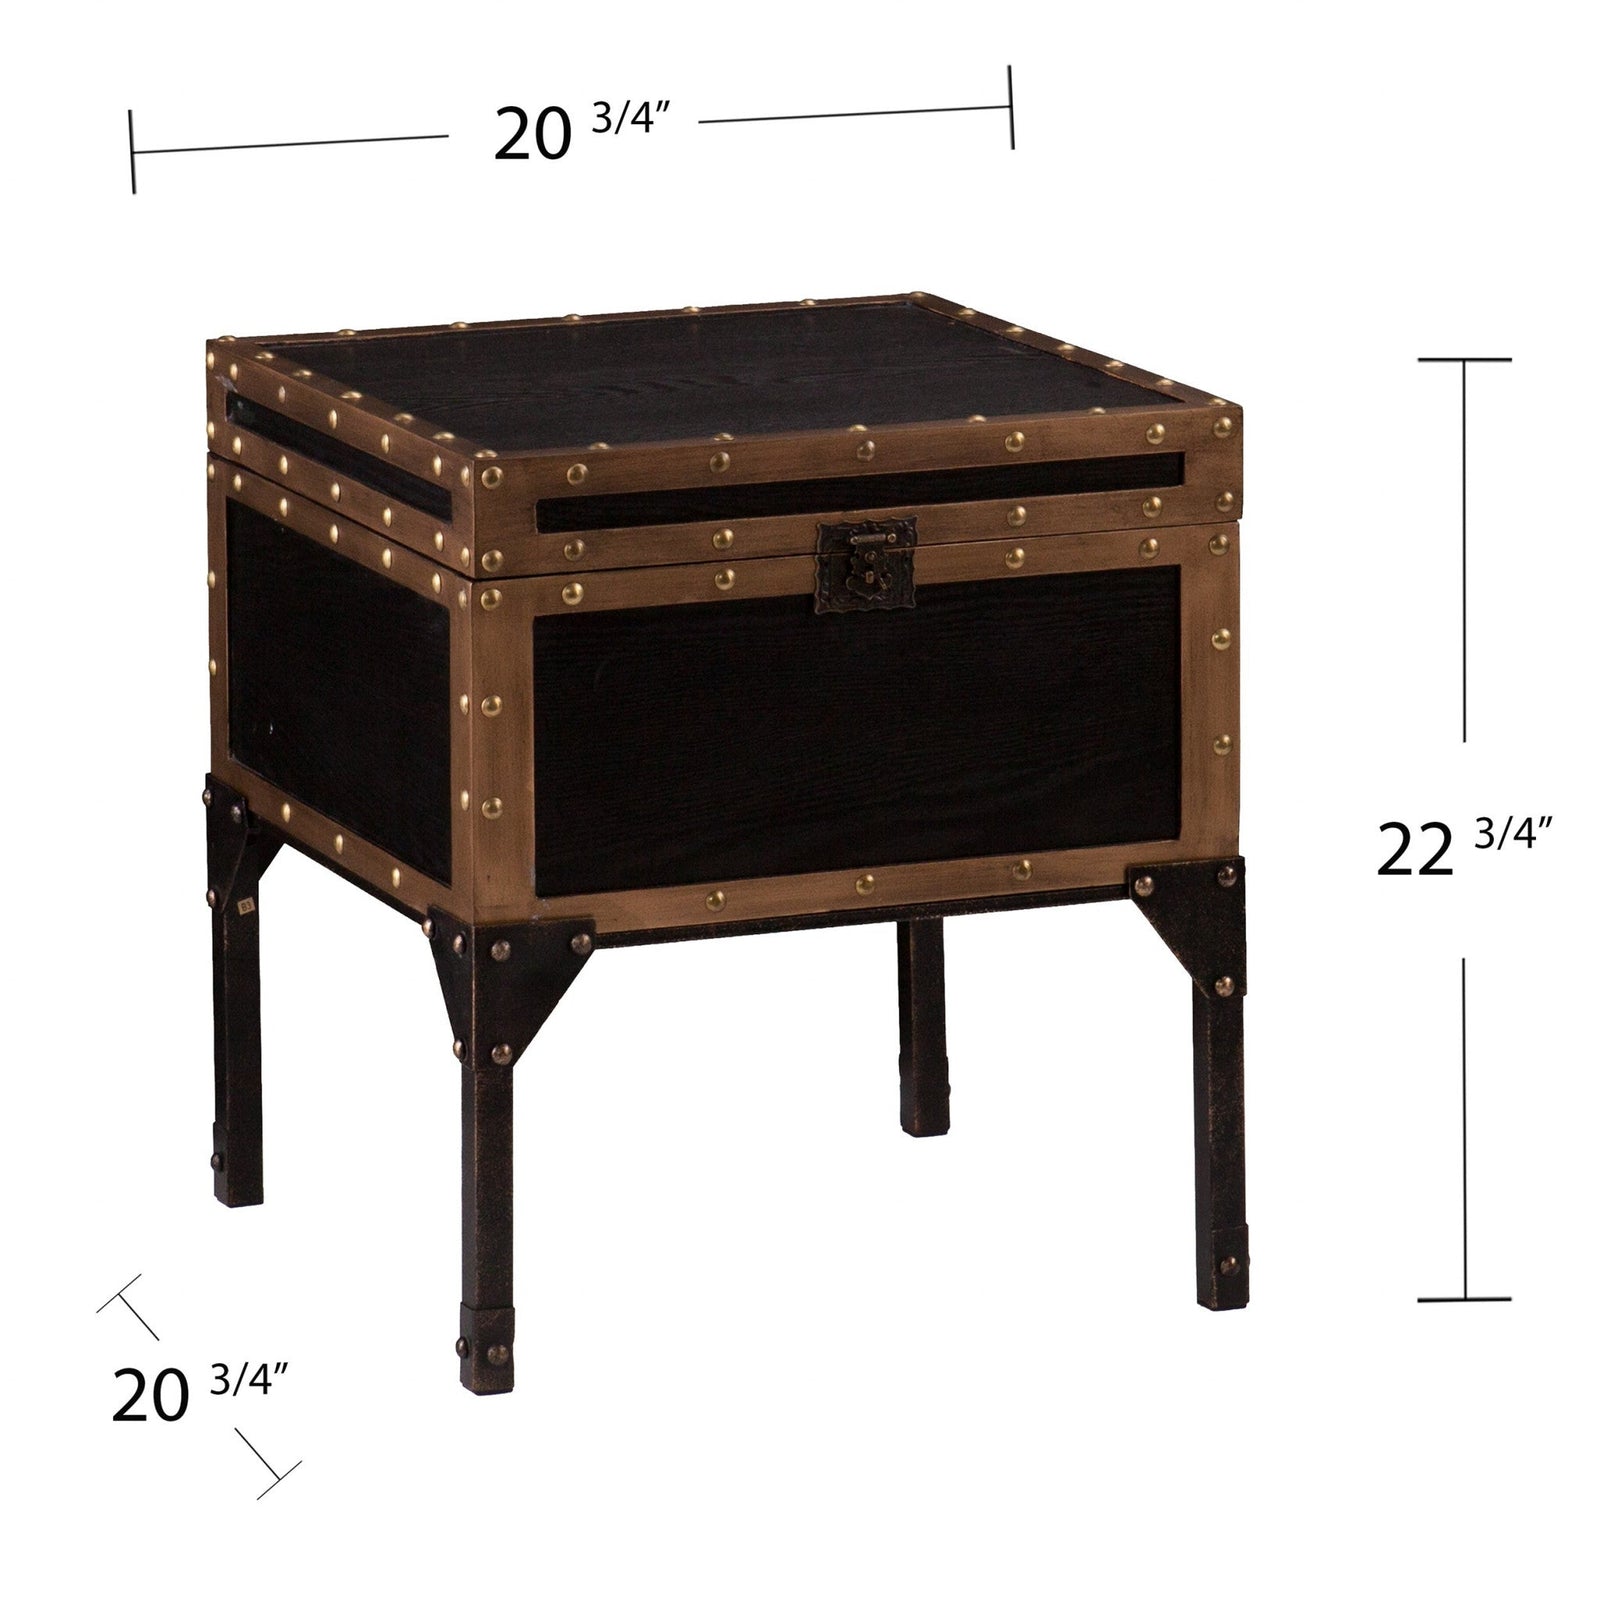 23" Black Manufactured Wood And Iron Square End Table